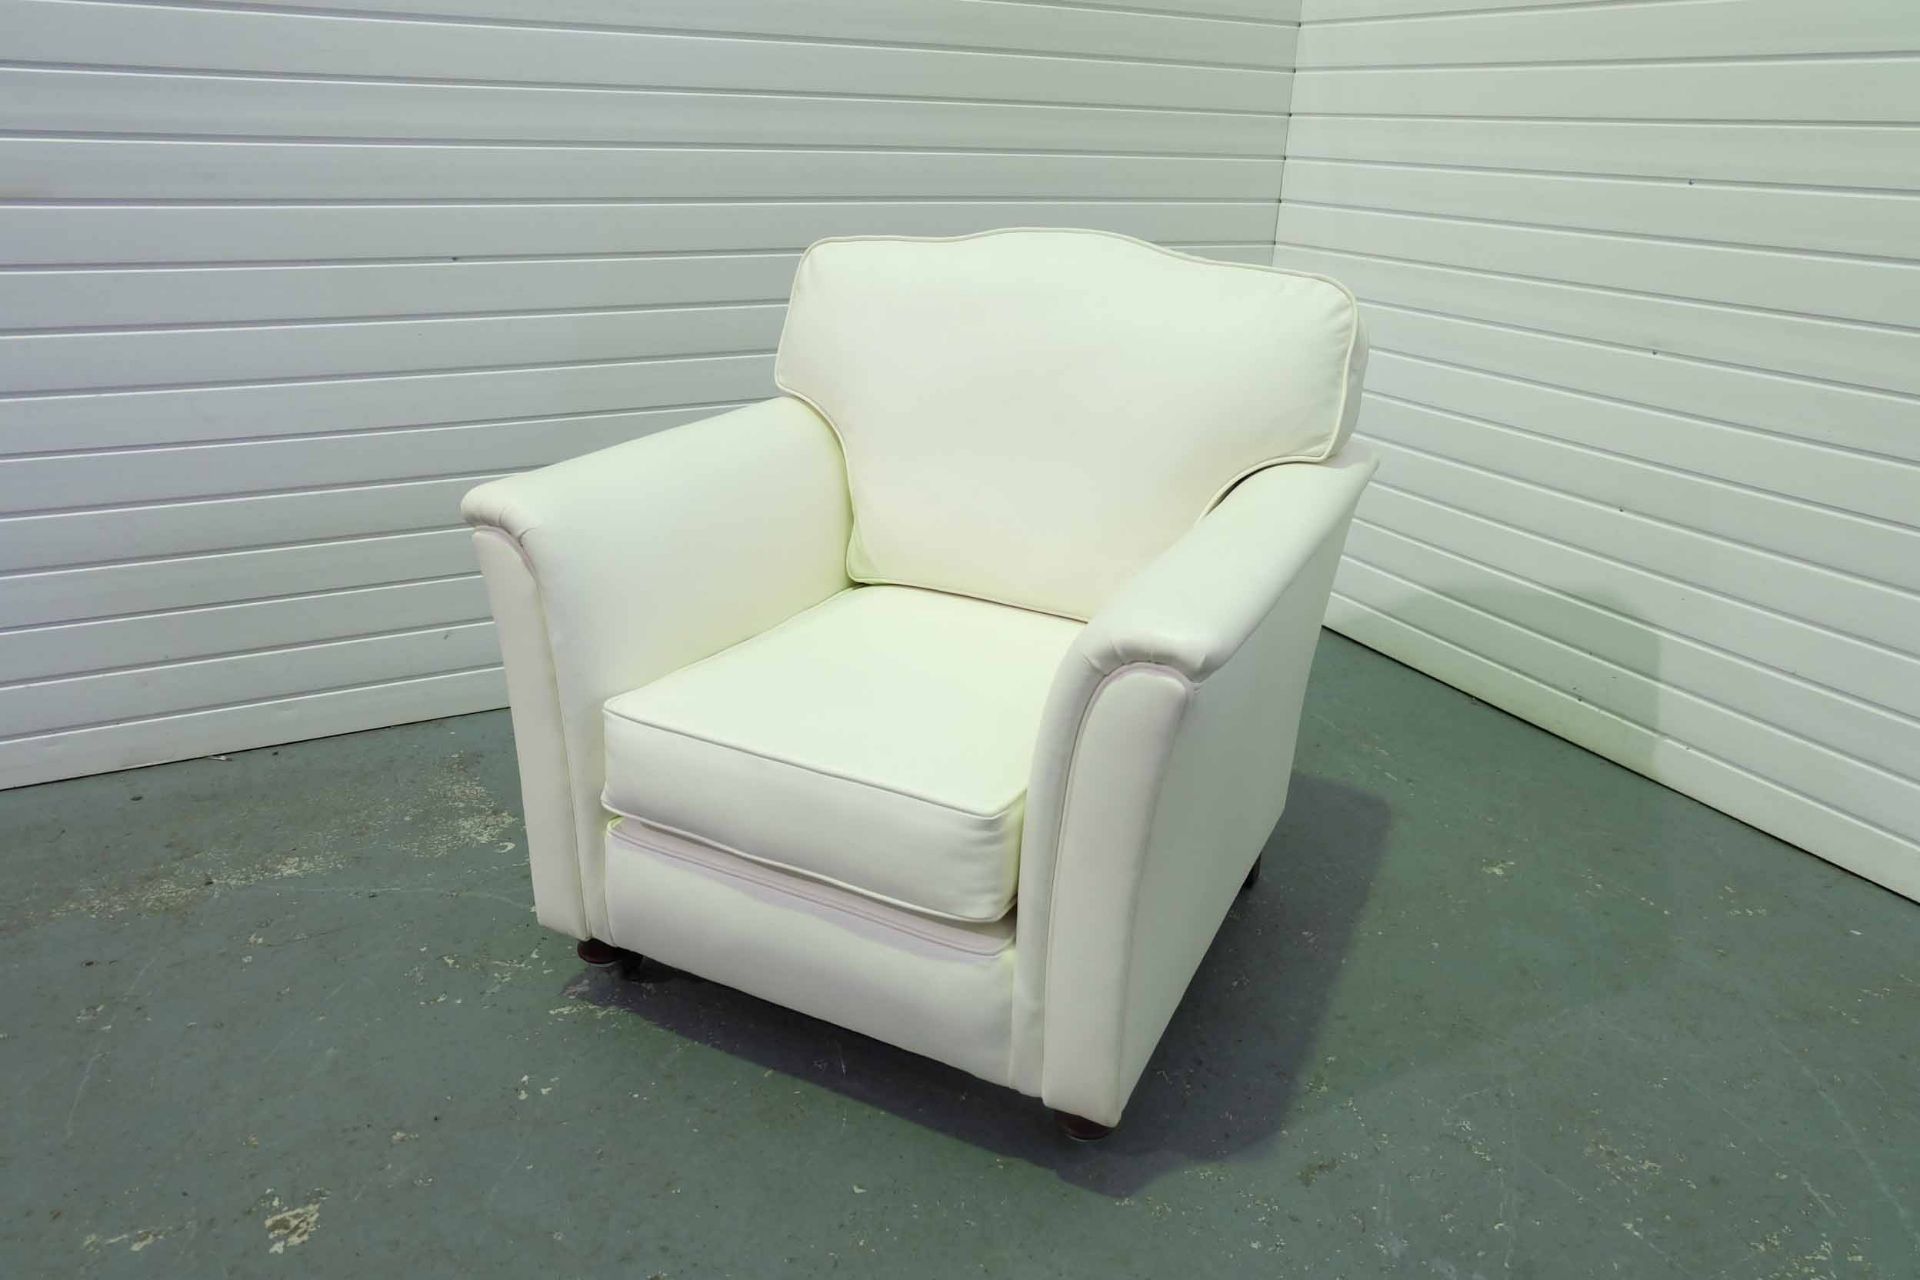 Steed Upholstery 'Exeter' Range Fully Handmade All Leather Chair. With Castor Wheels to the Front of